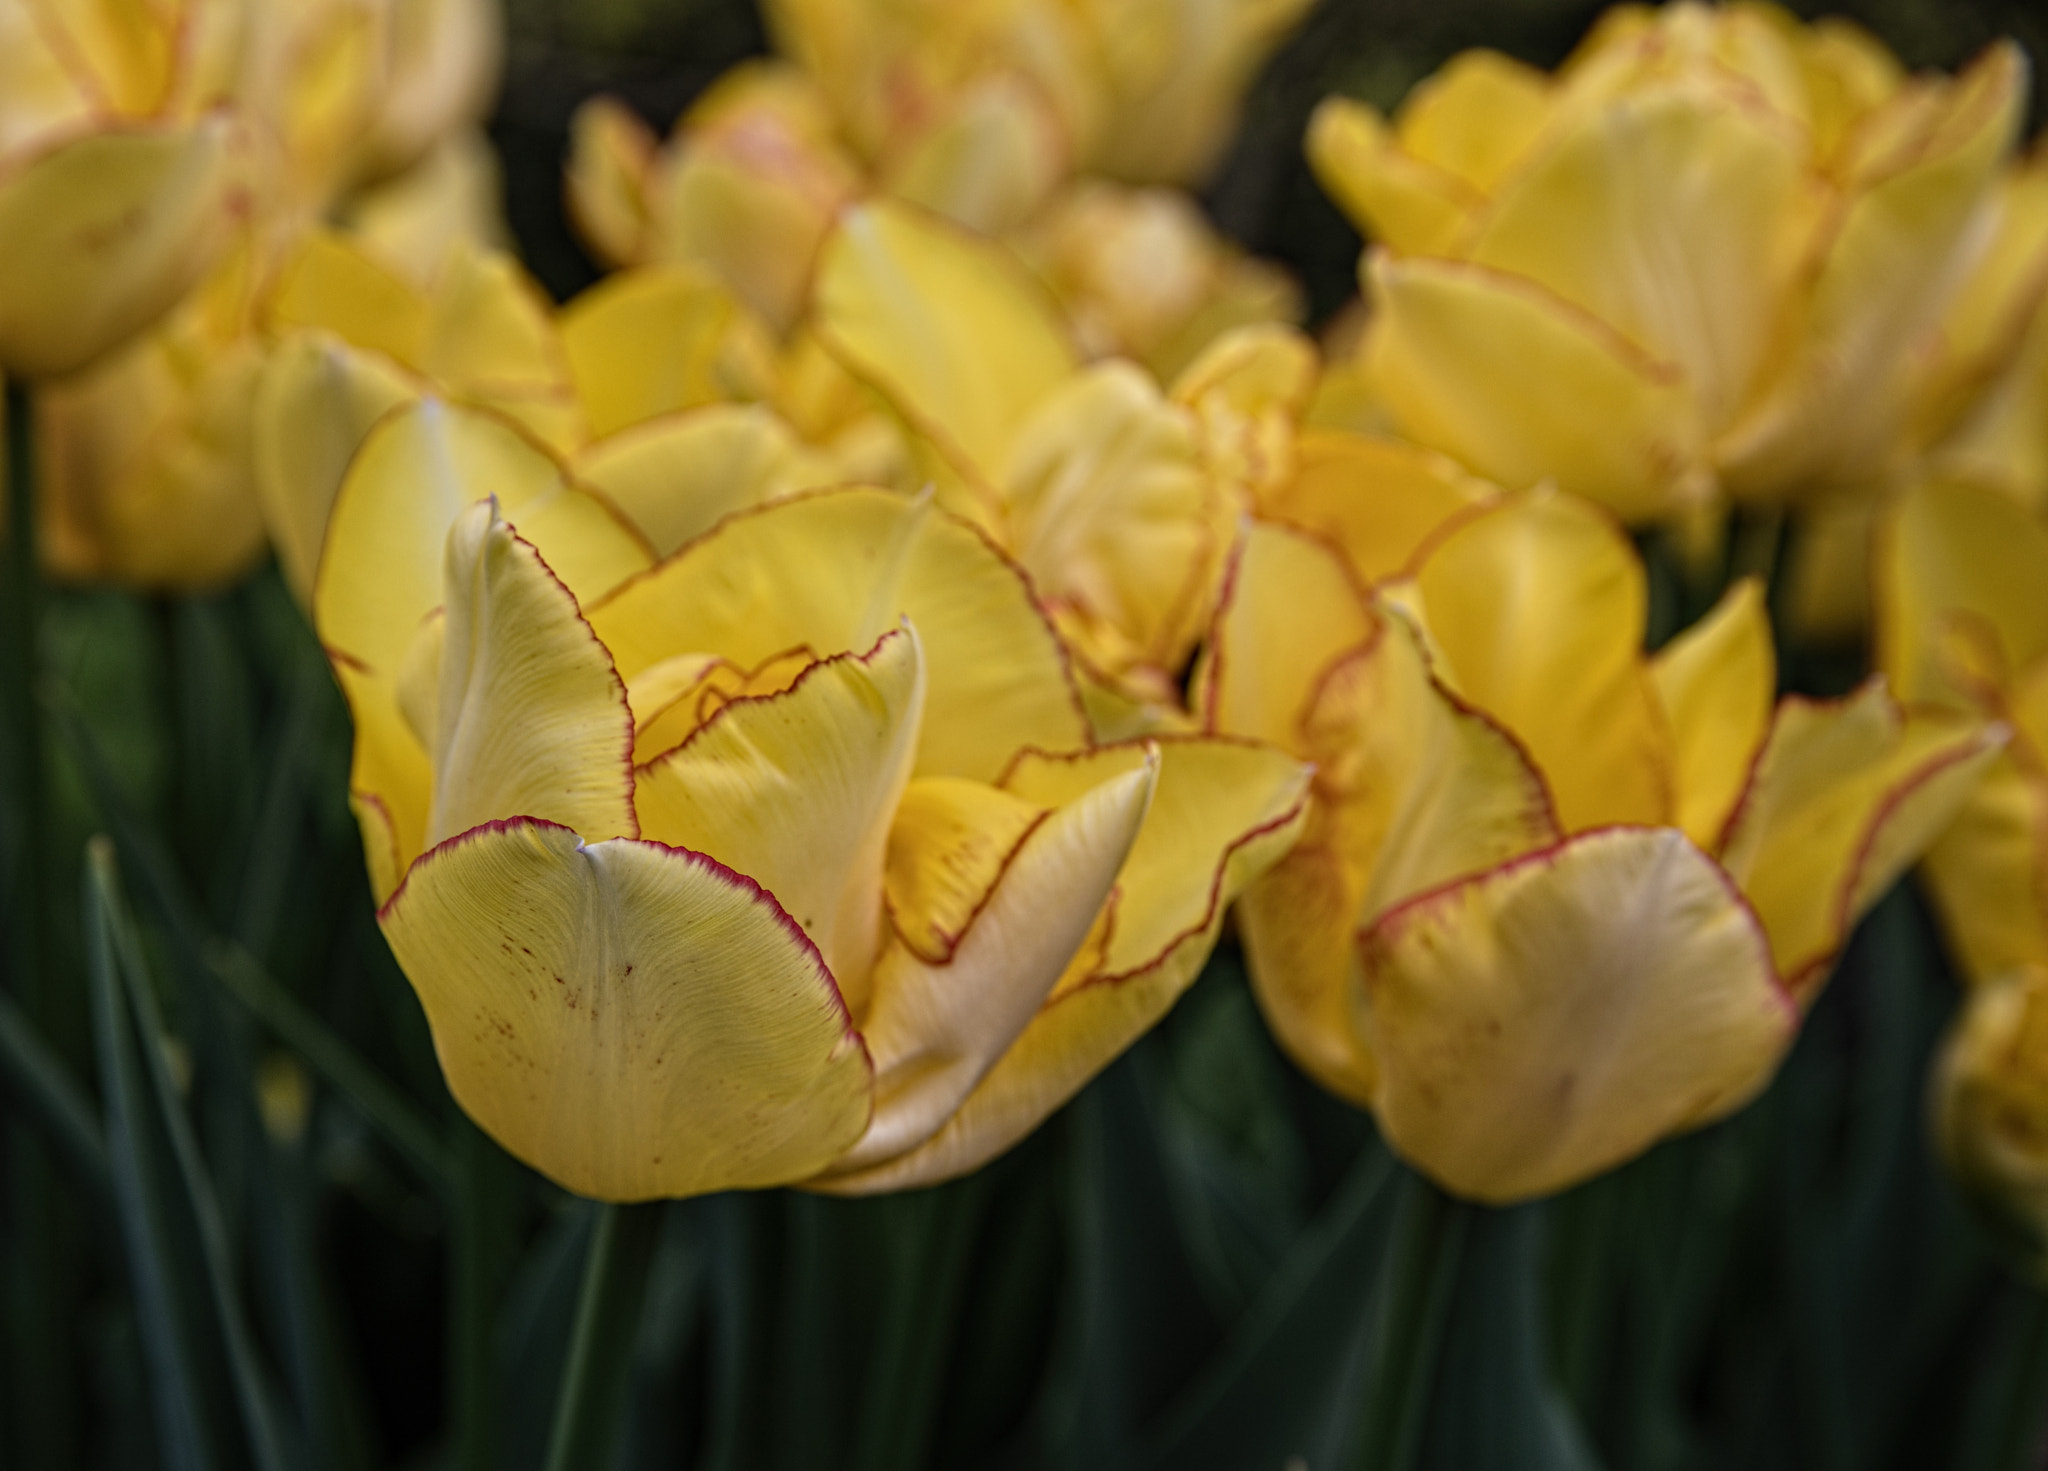 Sigma 24-105mm f/4 DG OS HSM | A sample photo. Yellow tulip photography